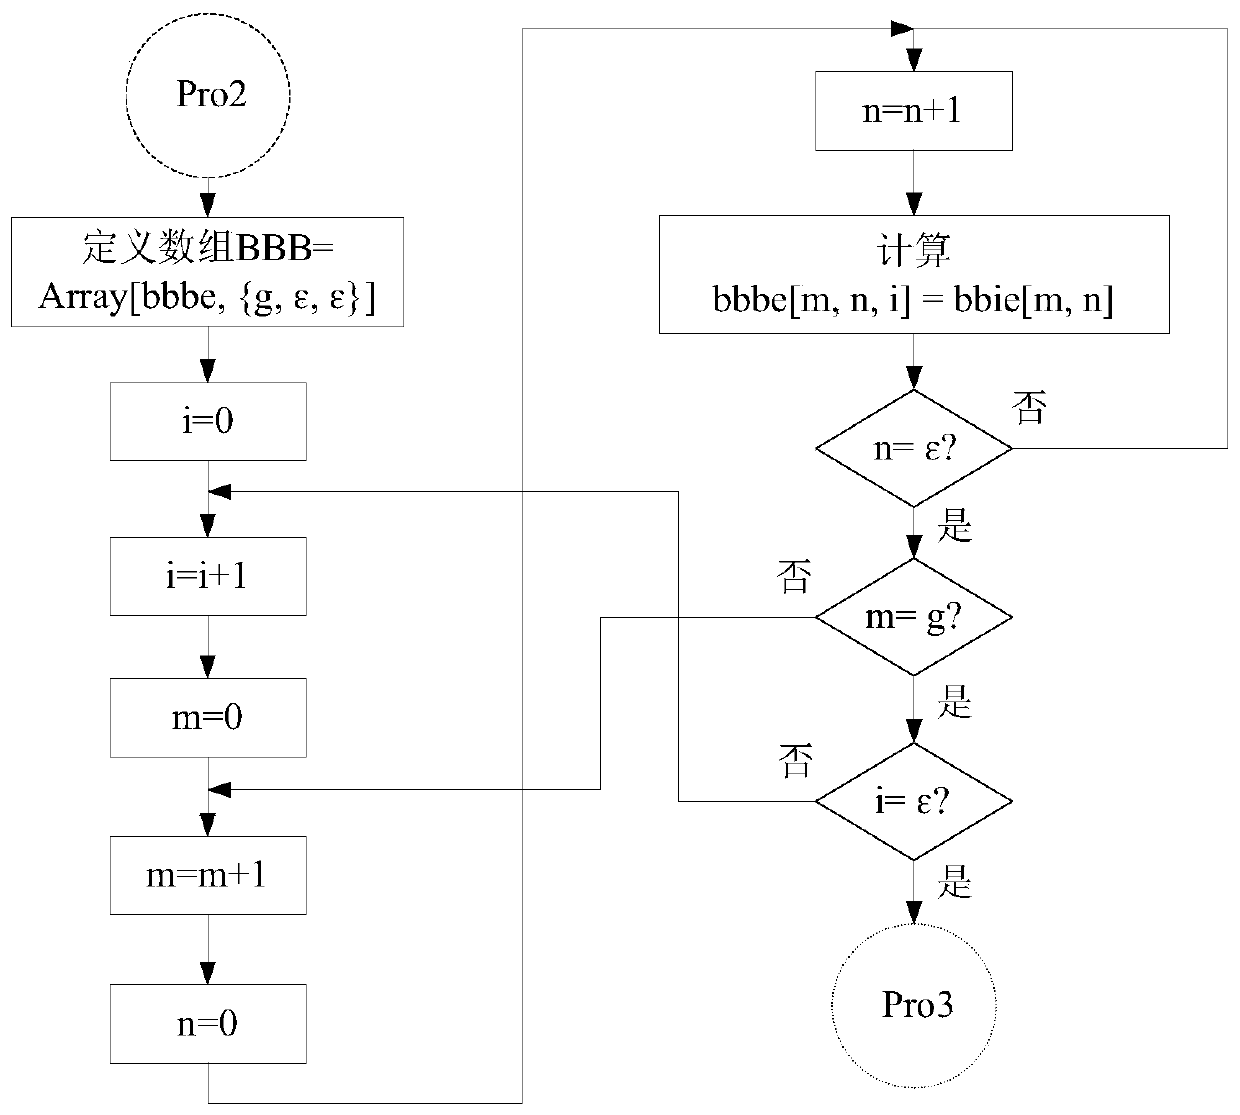 A Mechanized Mechanics Modeling Method for Nonholonomic Constrained Systems